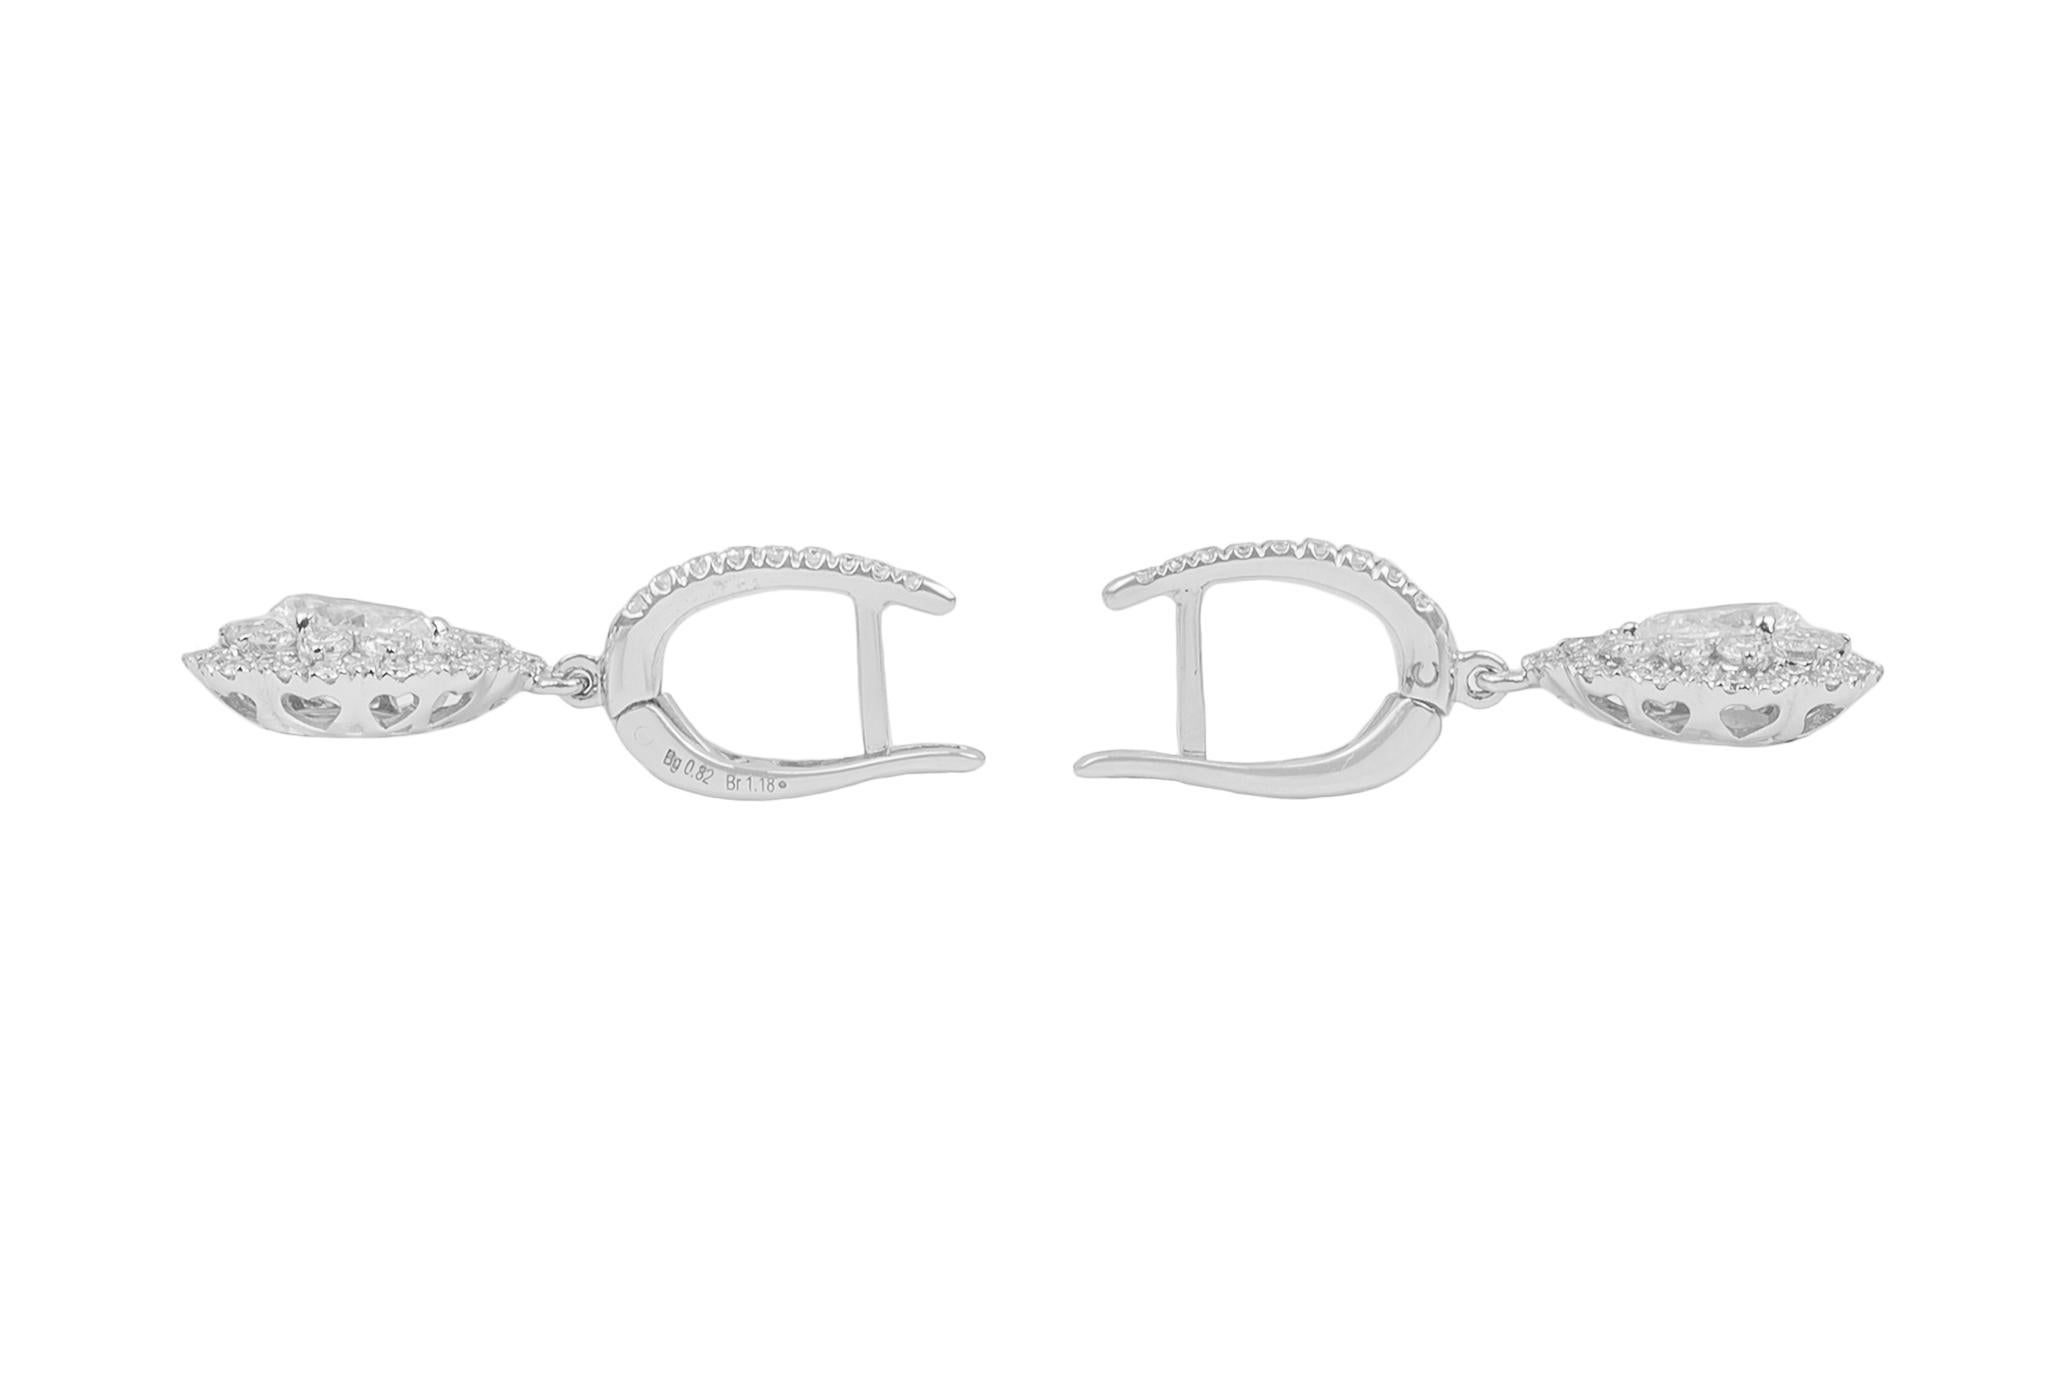 These elegant and bright 18K white gold drop earrings are made in Italy by Crivelli.
They feature a central pear cut diamond surrounded by brilliant cut diamonds set all over the front side of the setting.
Diamonds total content is 2.0ct
18k white